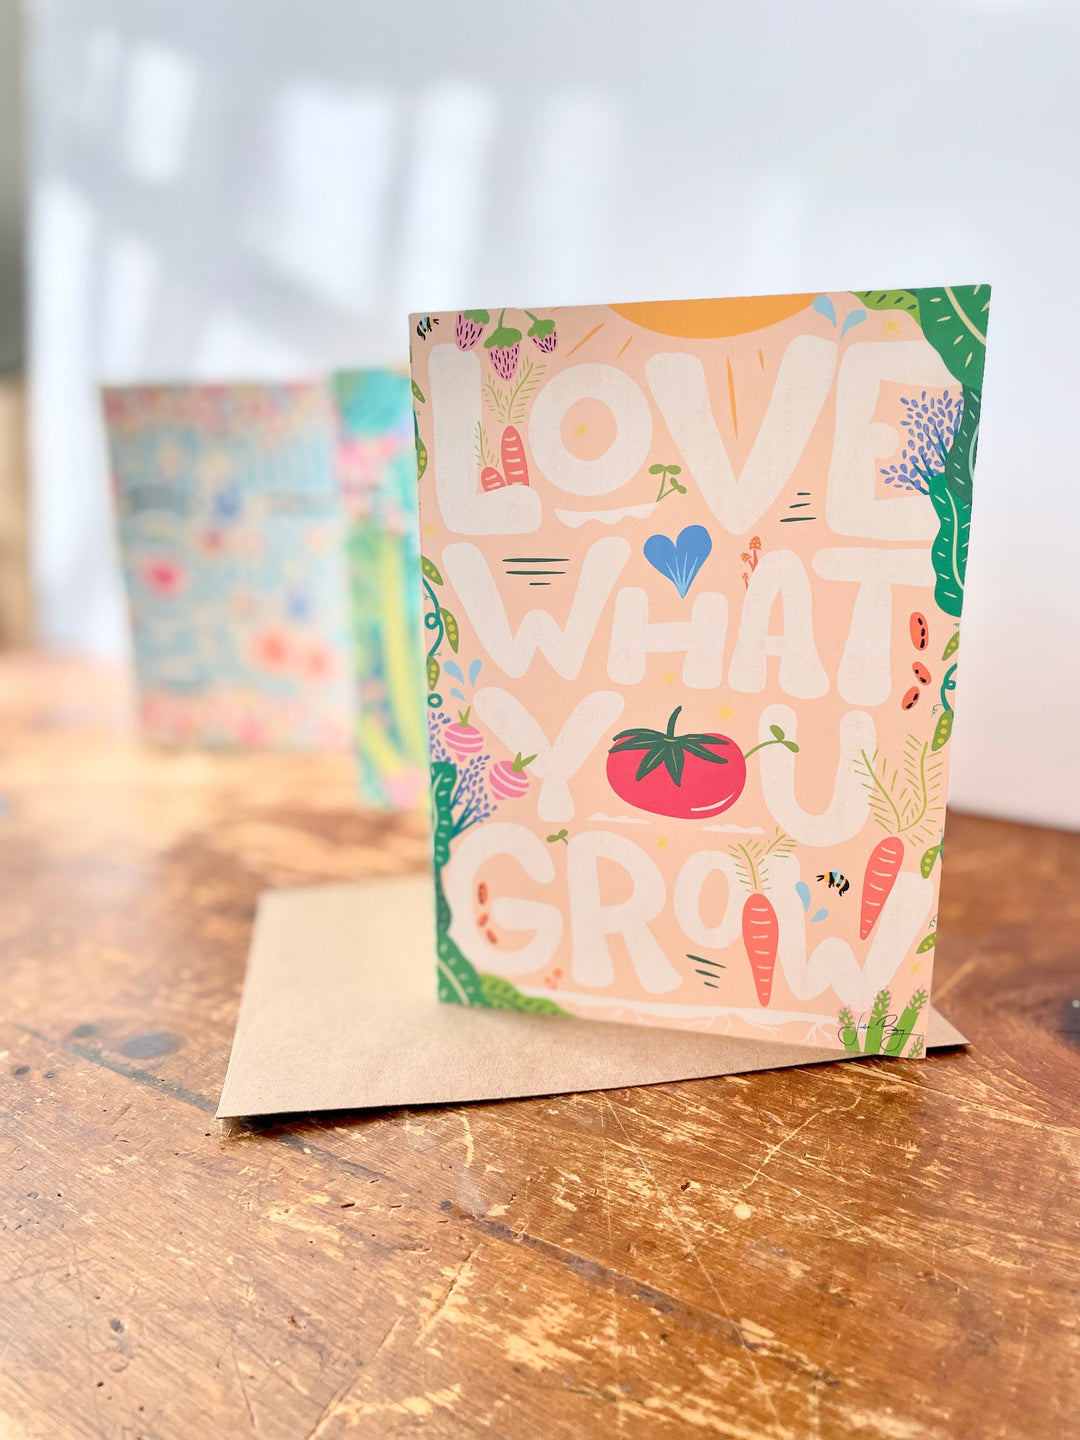 Eco Recycled 5x7 Greeting Cards w. Hand-Drawn Art + Recycled Envelopes, Blank inside - Assorted (Grow & Bloom)